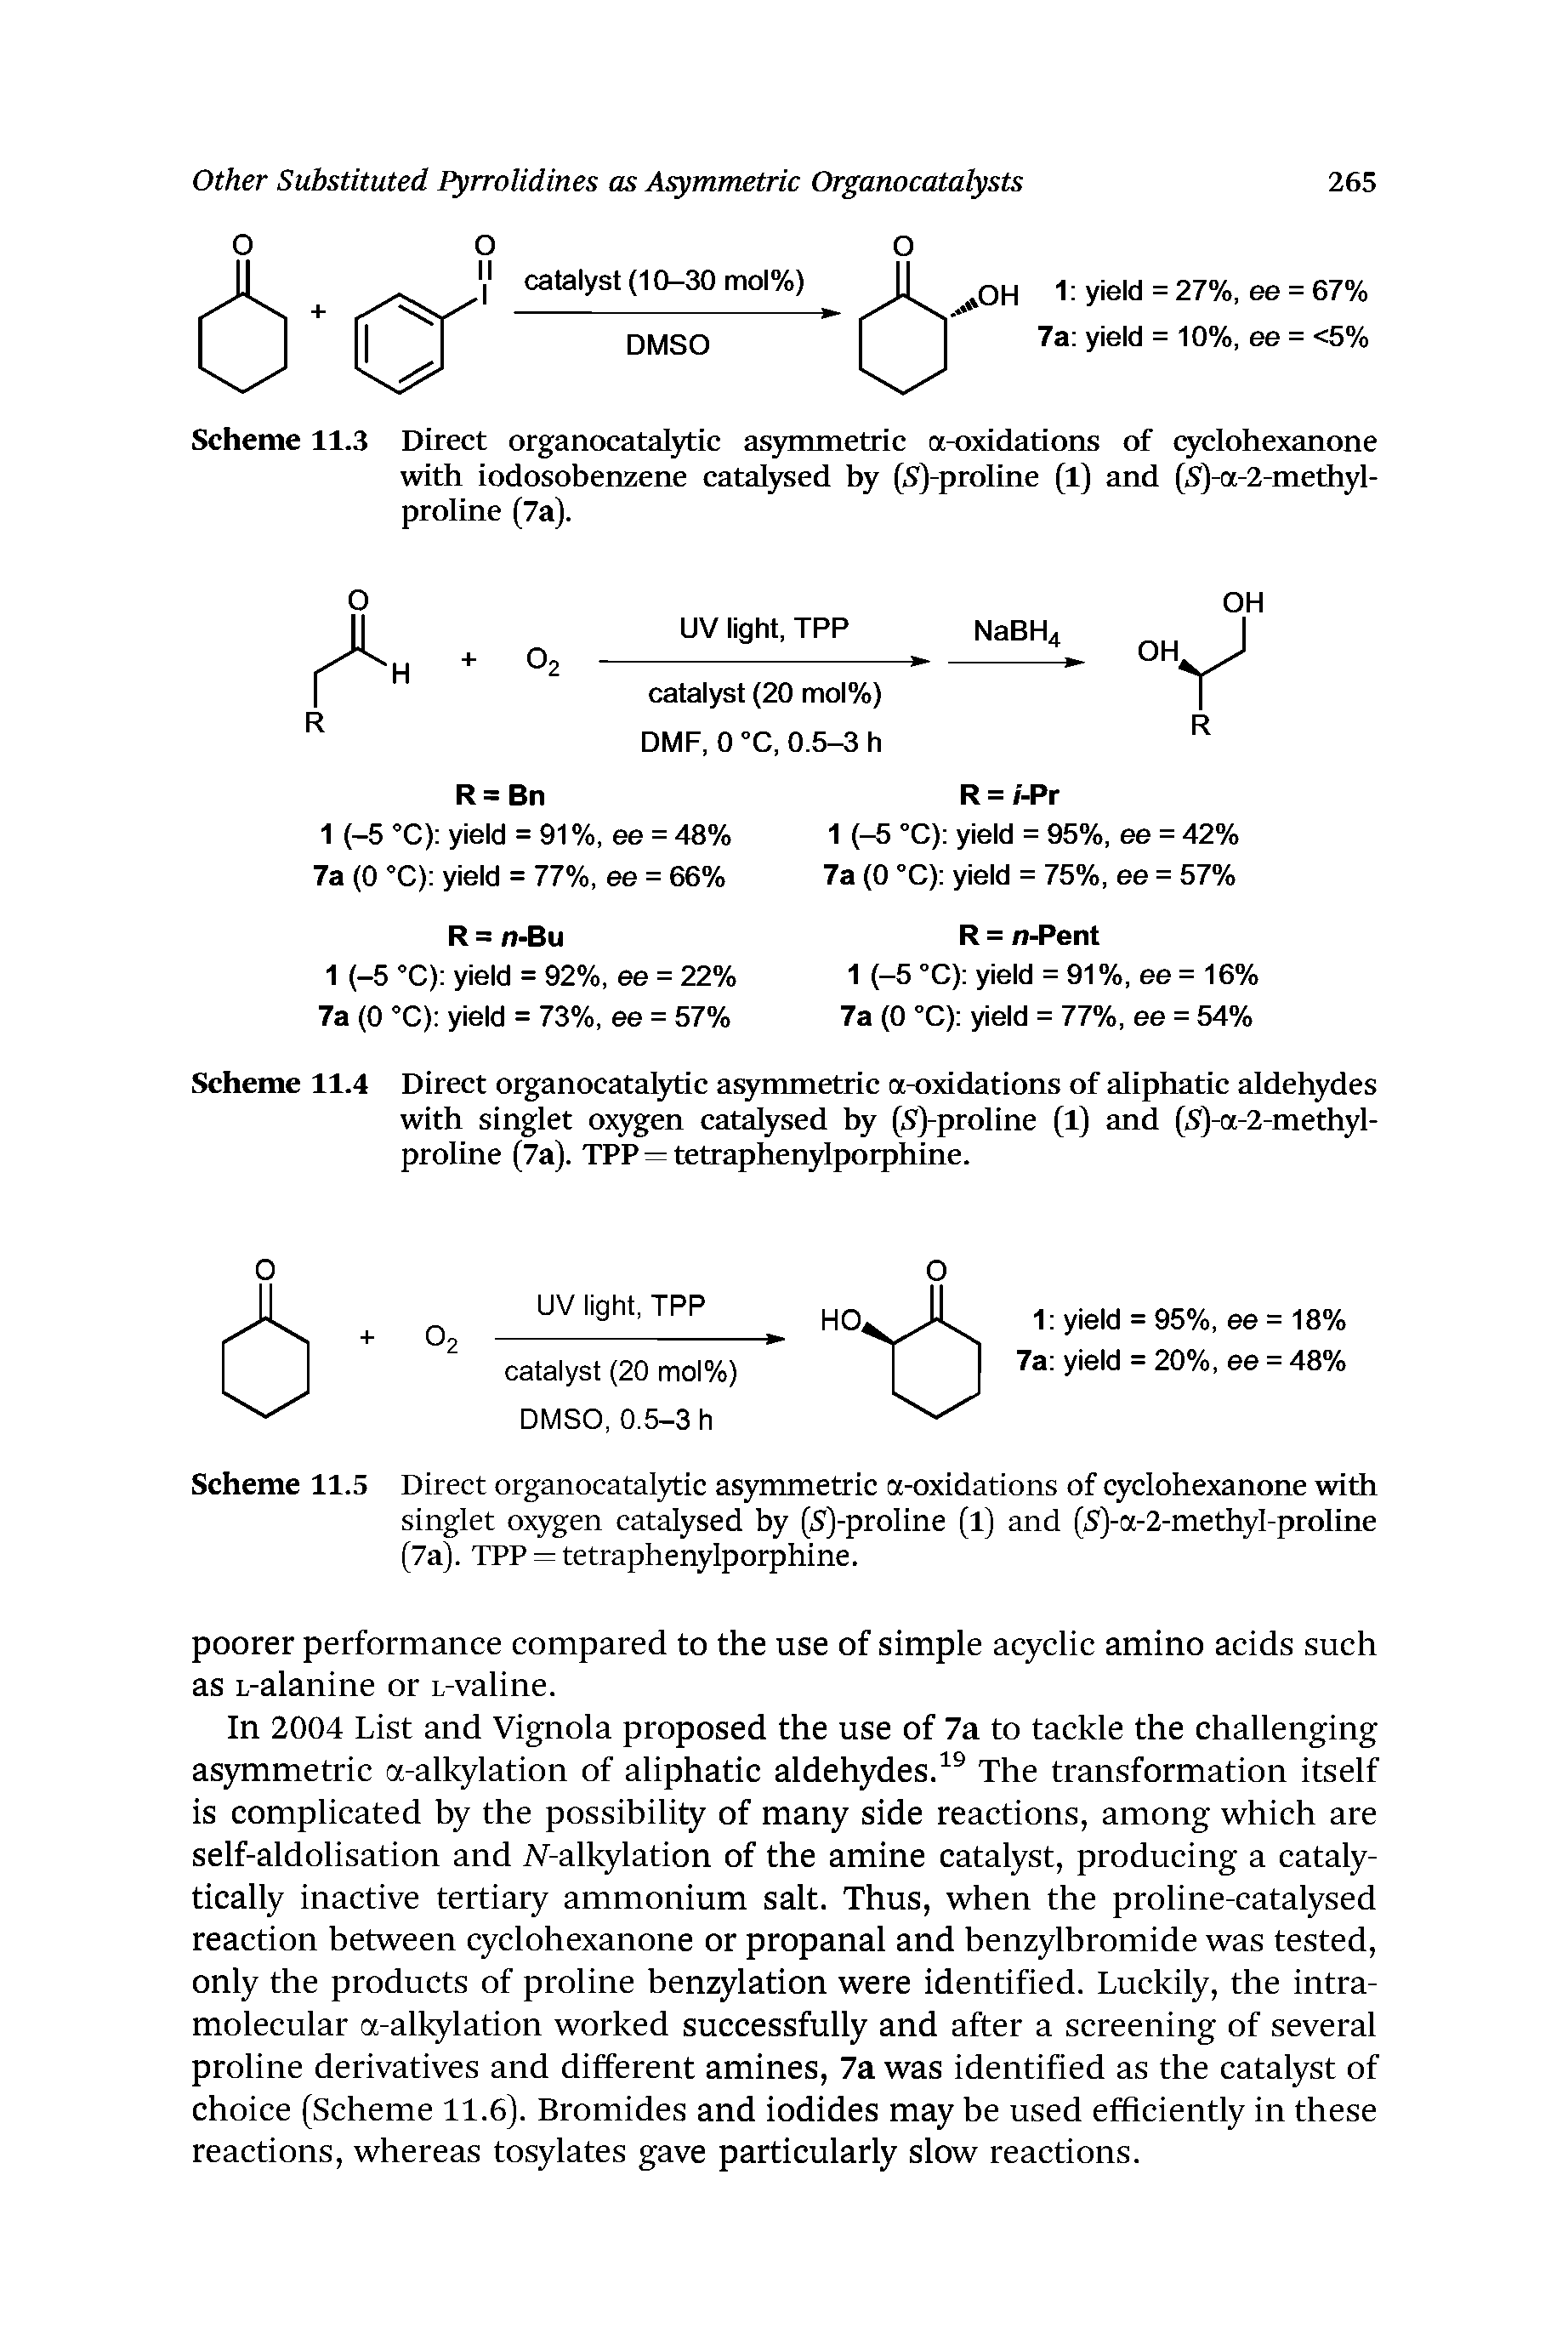 Scheme 11.3 Direct organocatatytic as5mnmetric a-oxidations of cyclohexanone with iodosobenzene catatysed by (S )-proline (1) and (S )-a-2-methyl-proline (7a).